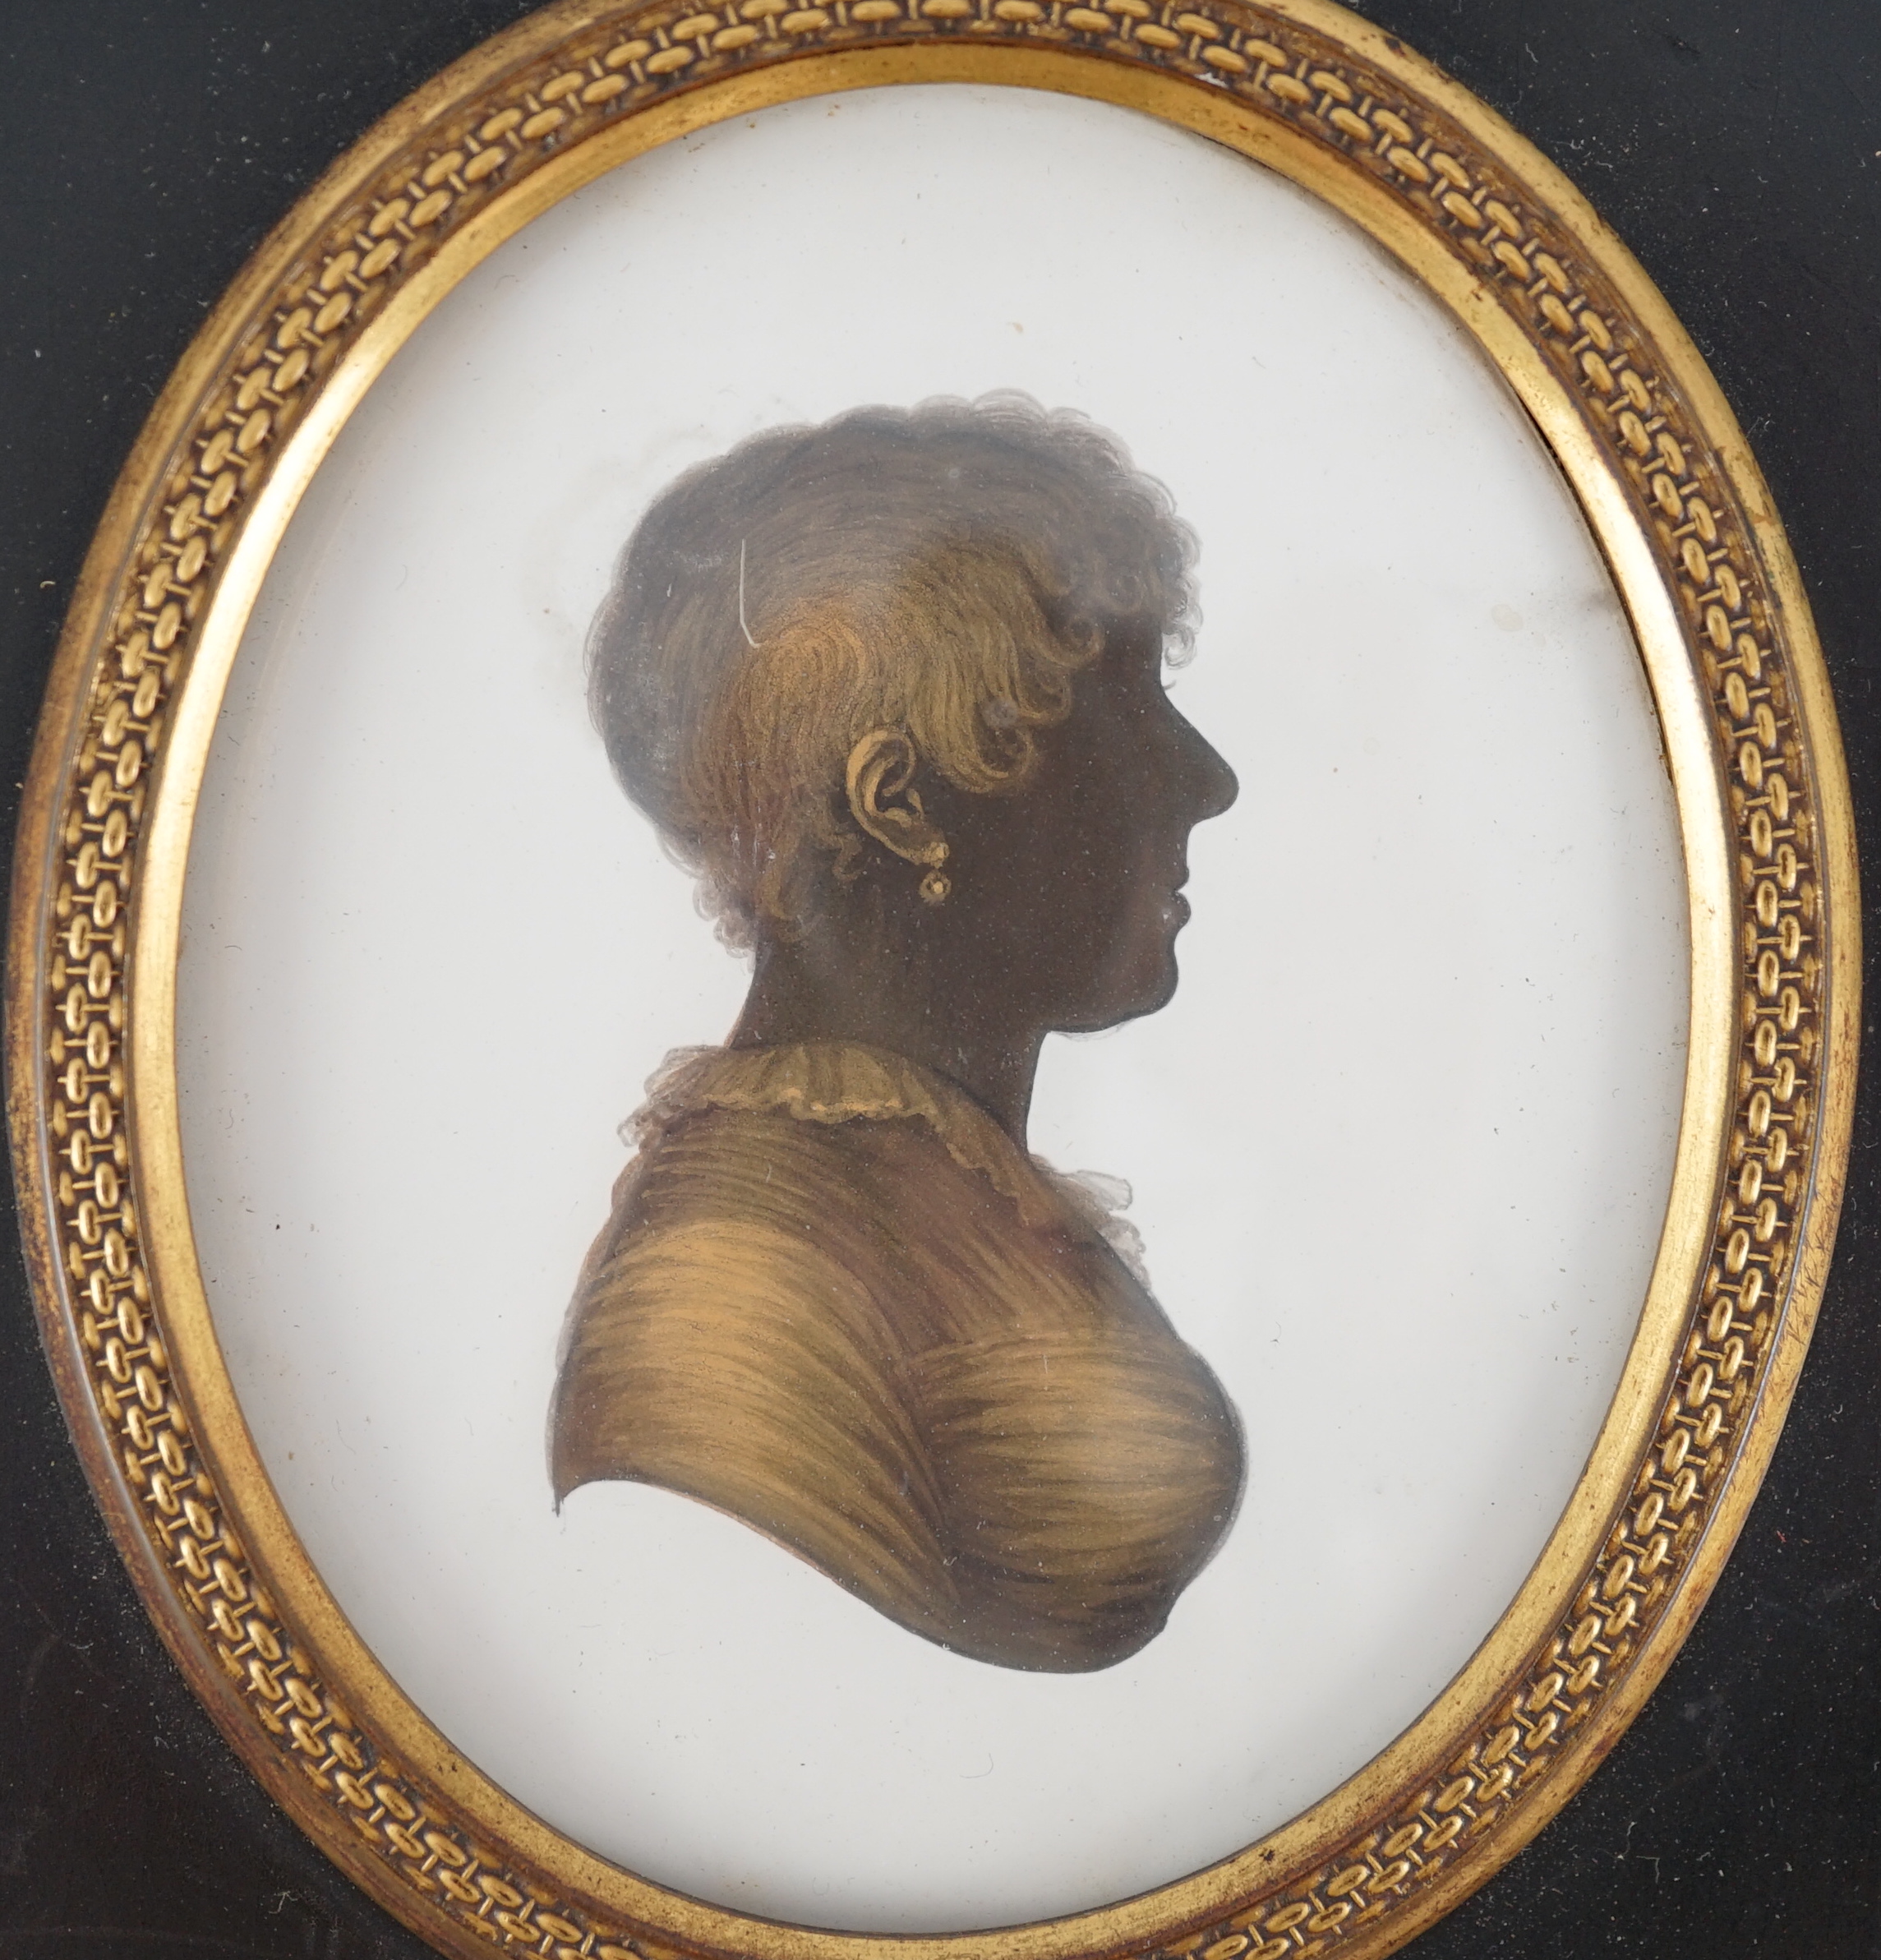 John Miers (1752-1821), Silhouette of the Countess of Clarendon, painted and bronzed plaster, 8 x 6.5cm.